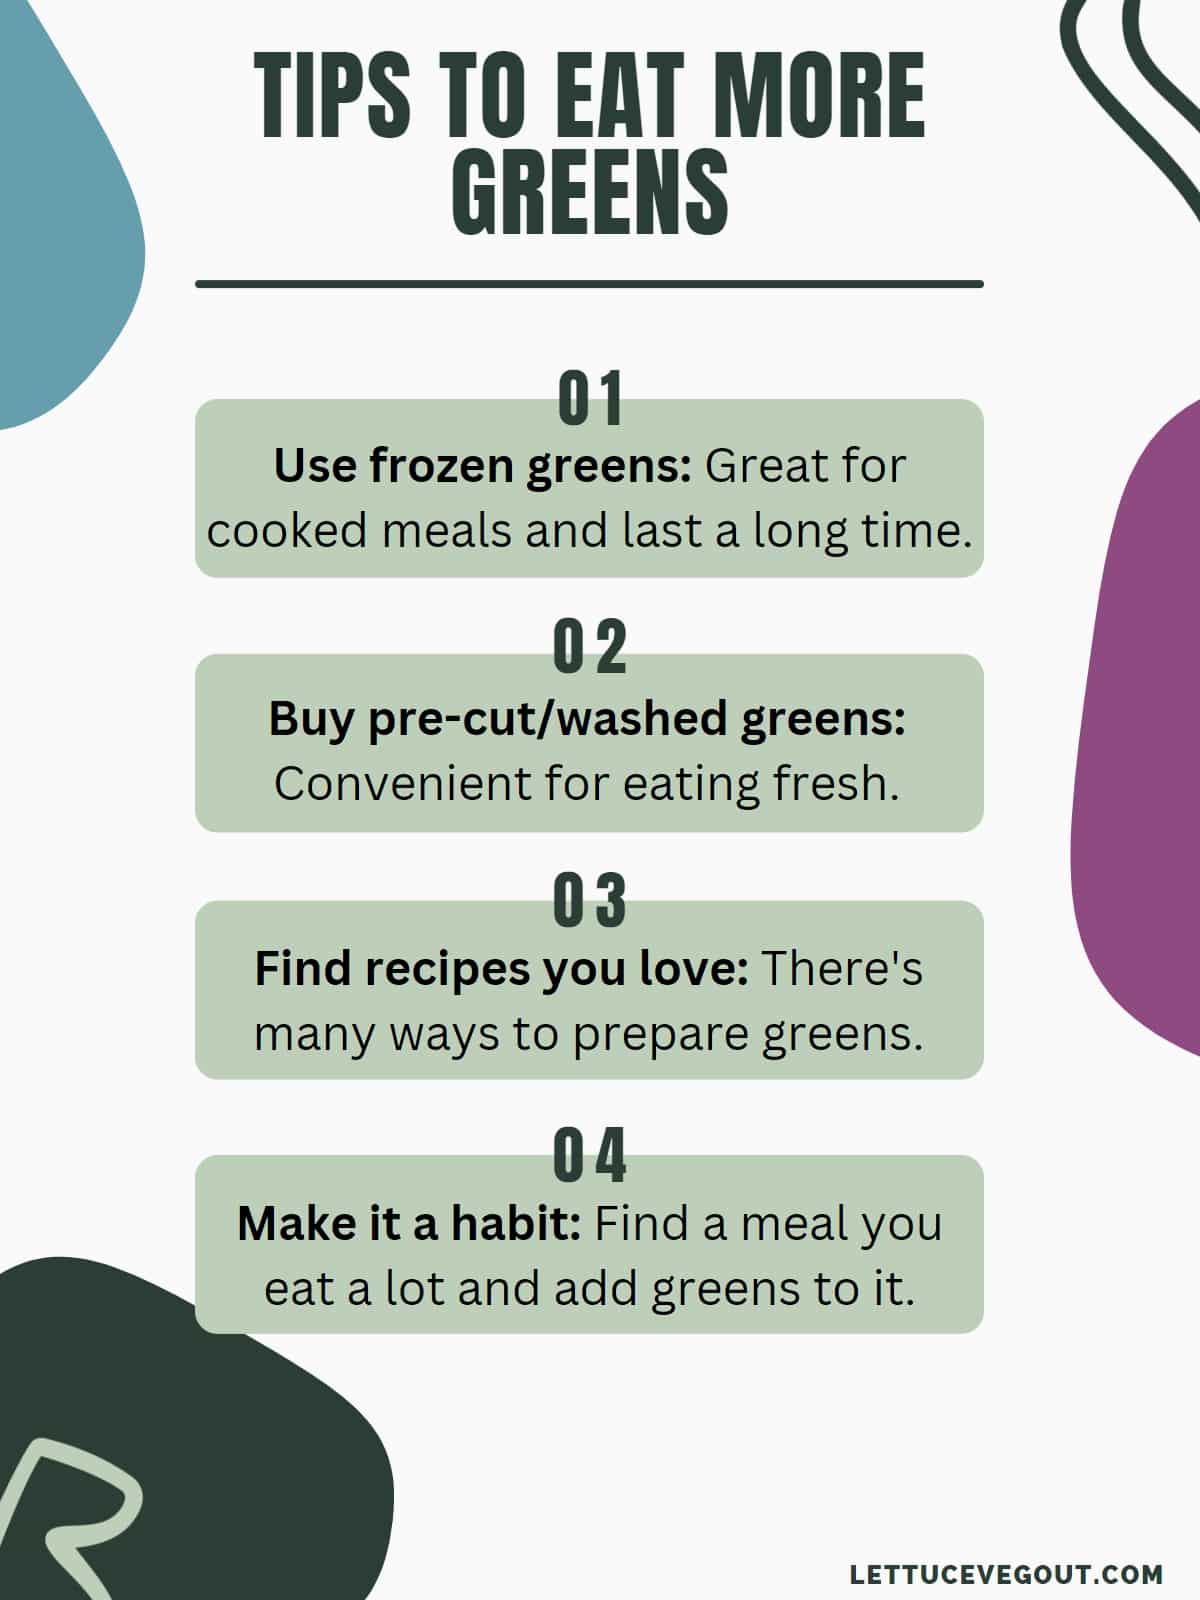 Infographic with 4 tips to eat more greens (use frozen, buy pre-cut, find recipes you love, make it a habit).